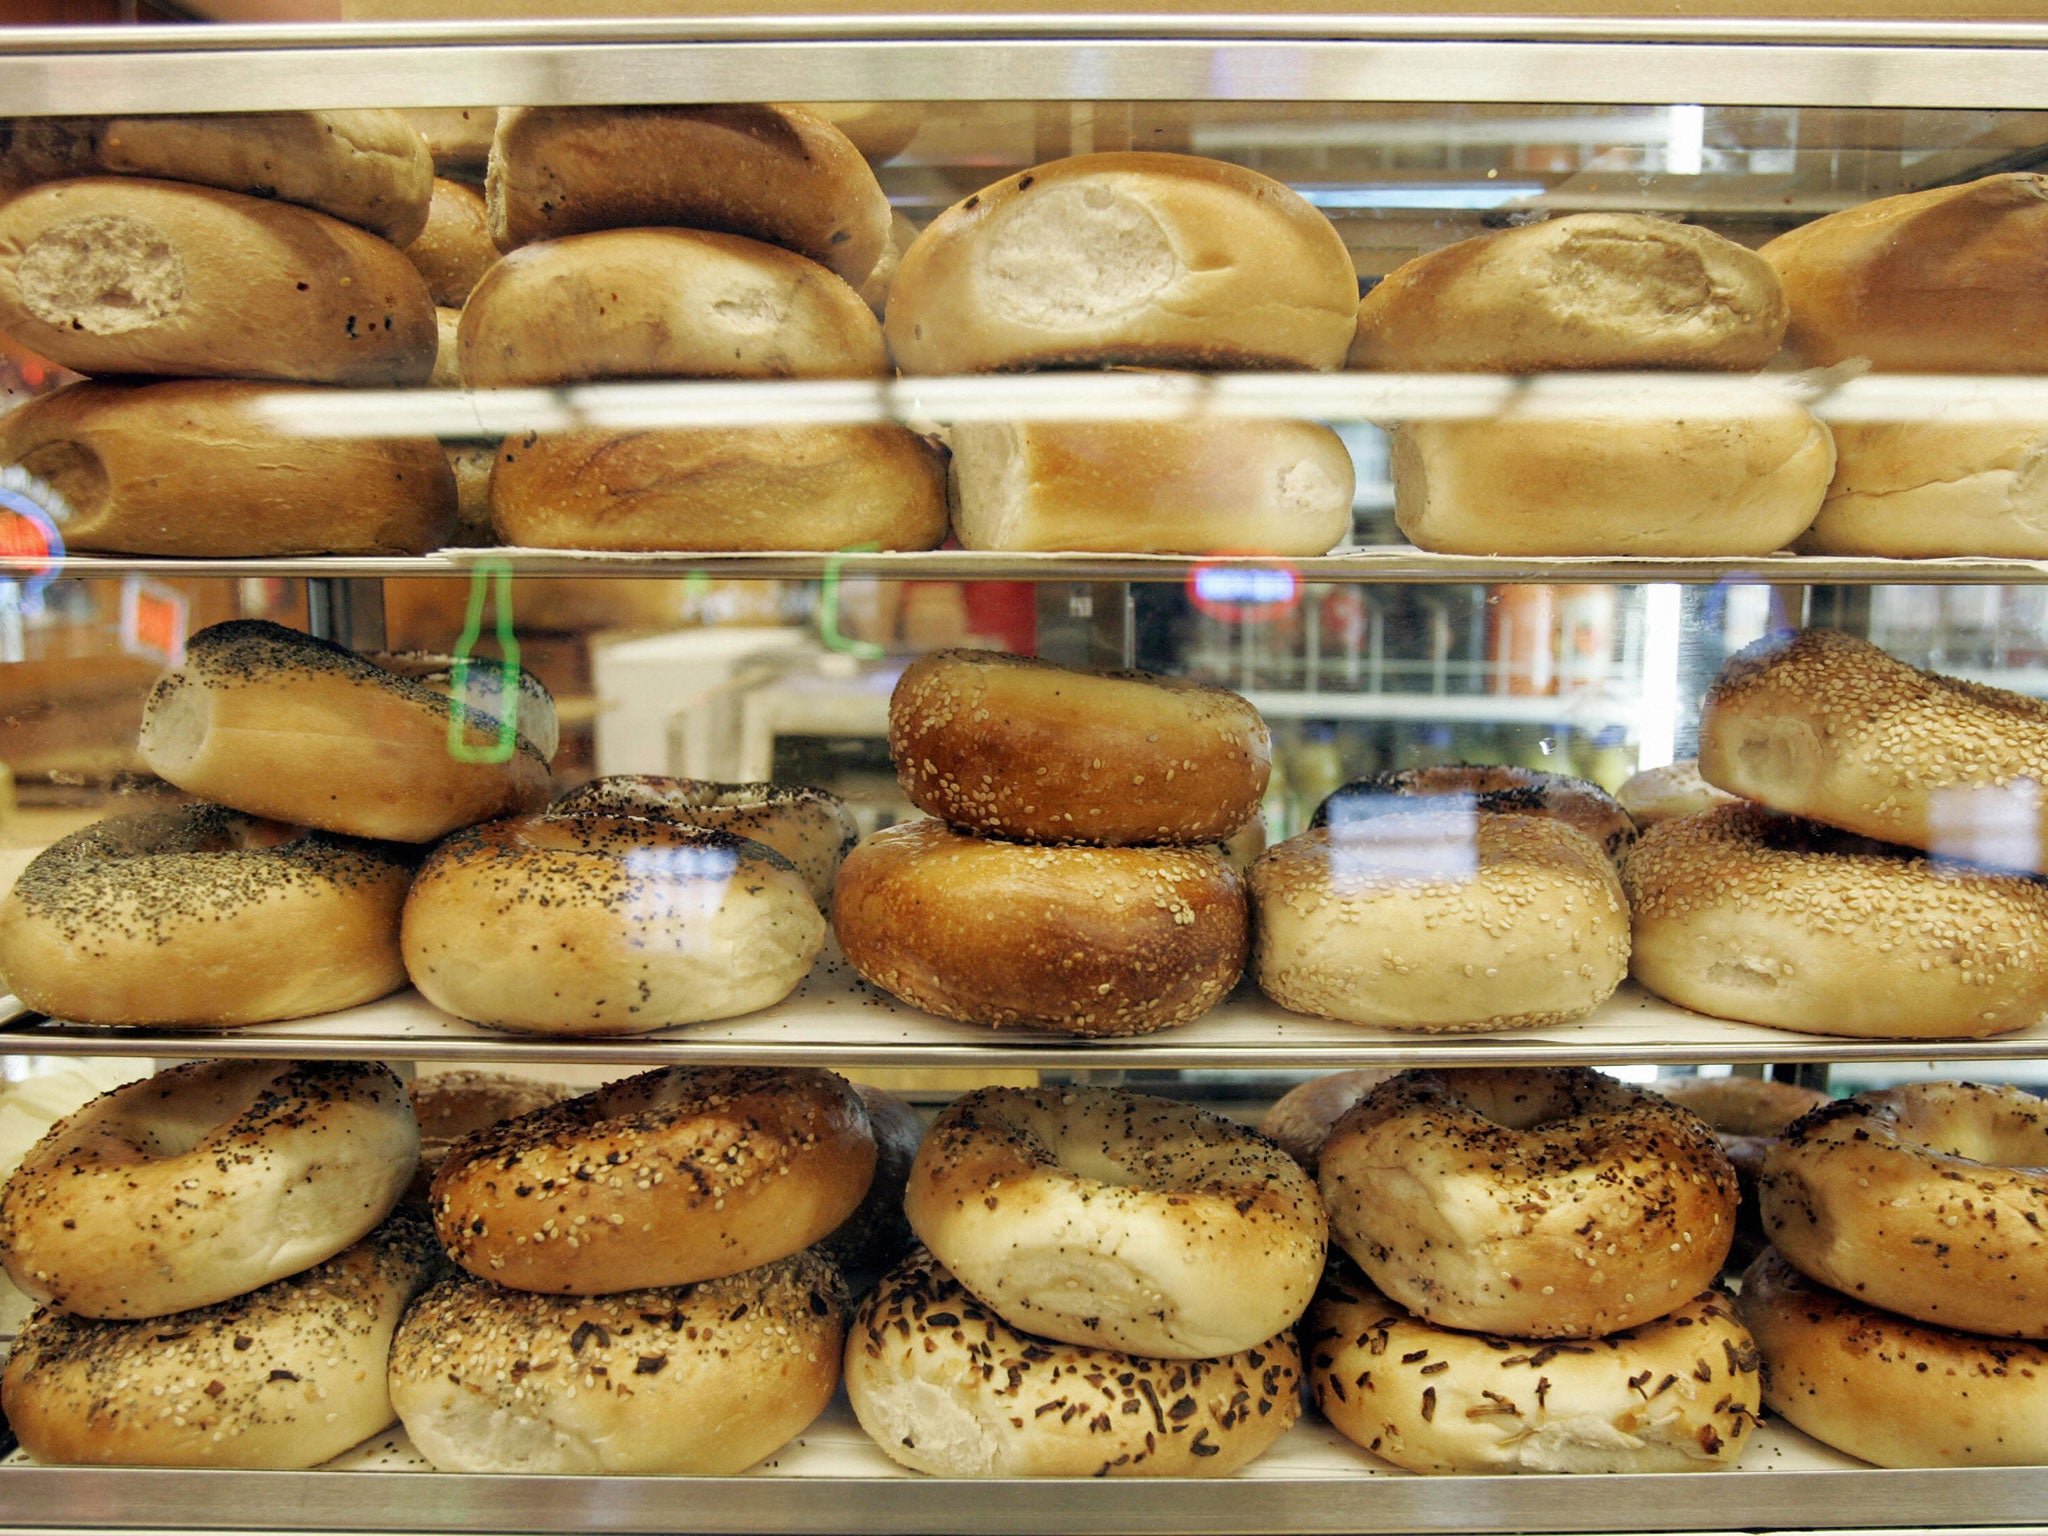 A bagel contains a whole cube of sugar